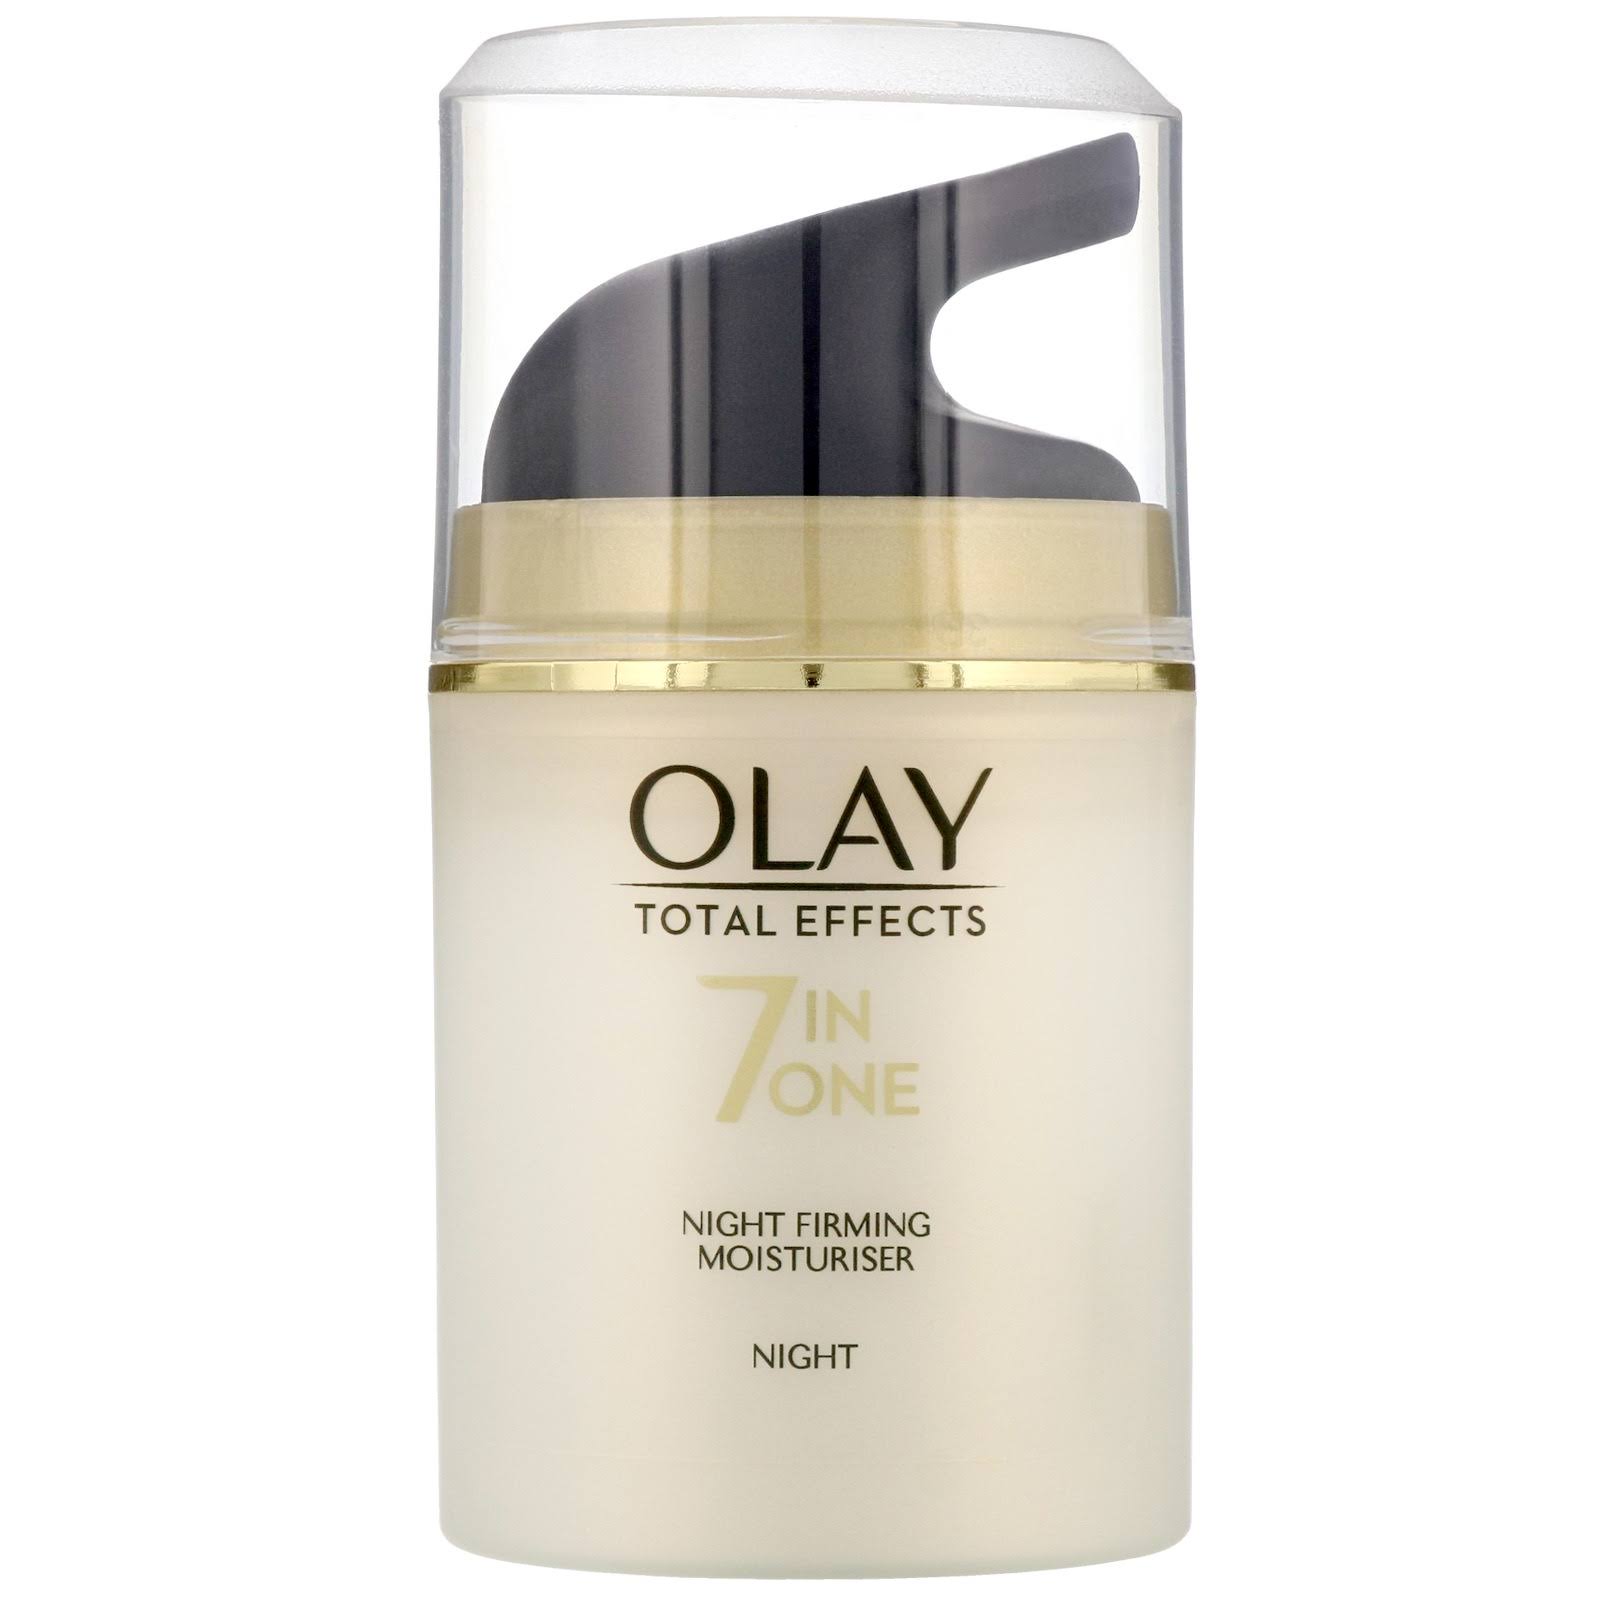 Olay Total Effects Anti-Ageing 7 in 1 Night Firming Moisturiser - 50ml